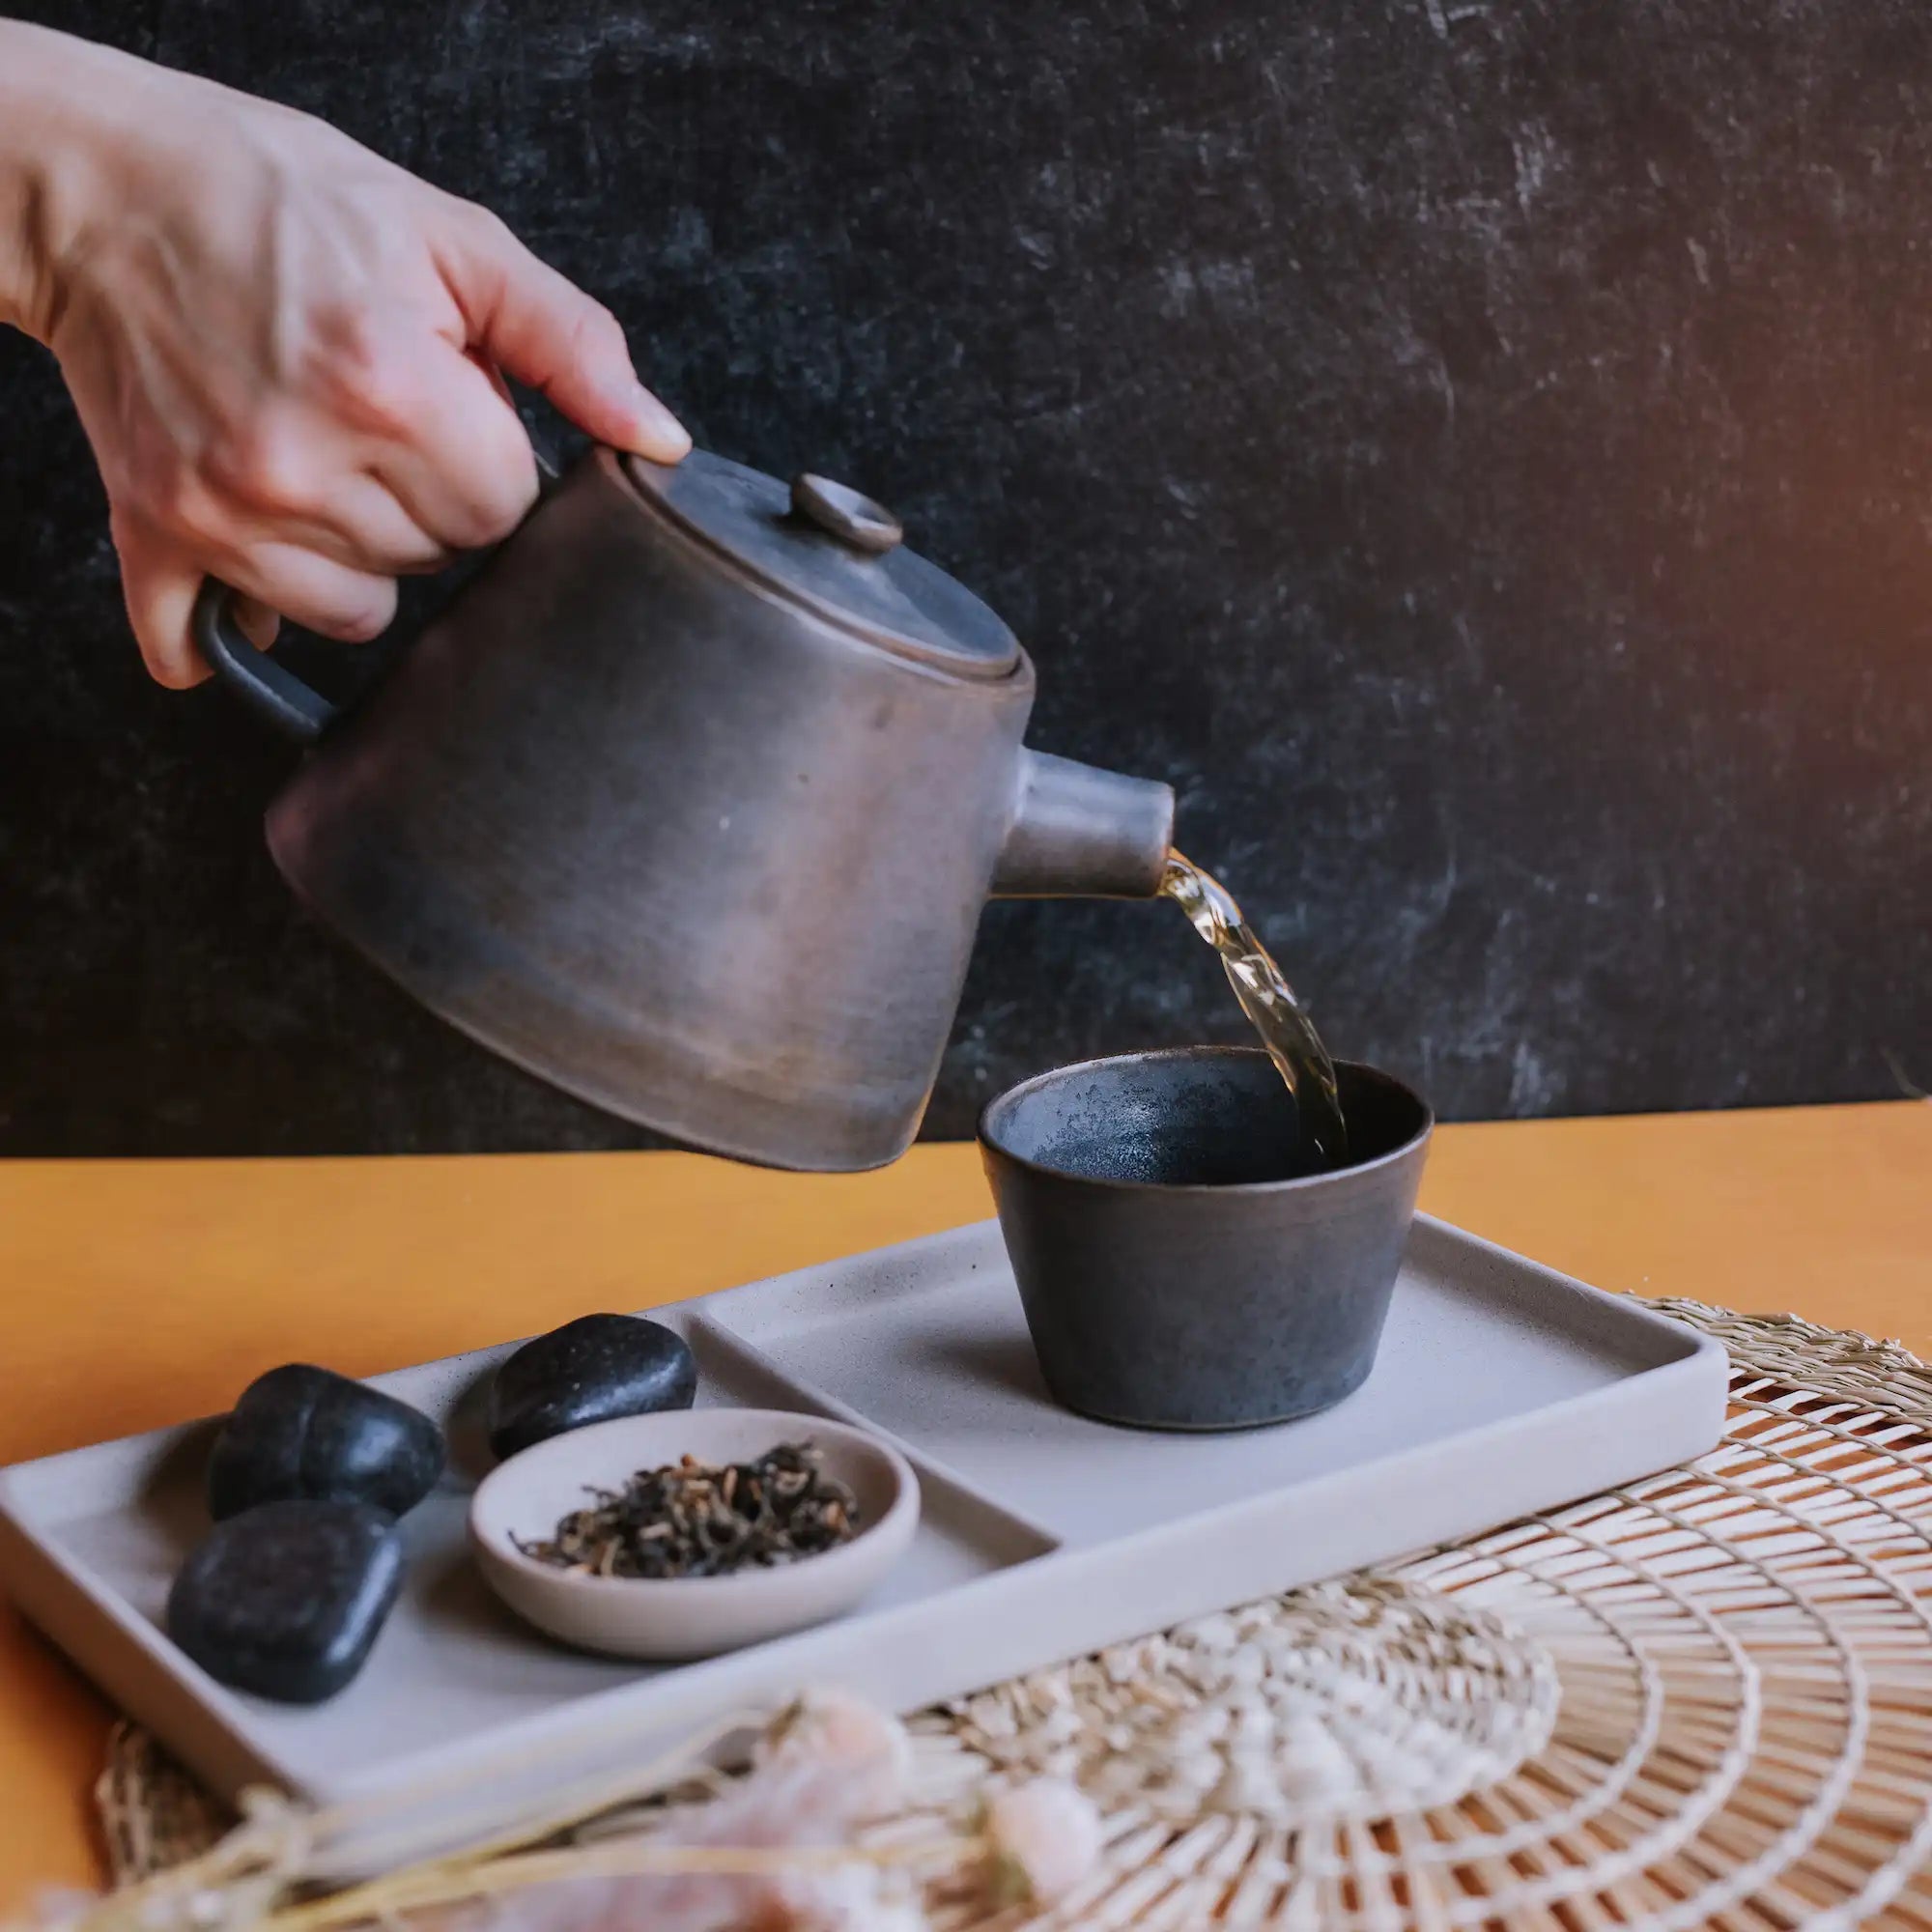 hand pouring black tea into a handleless cup from matching teapot with loose leaf black tea